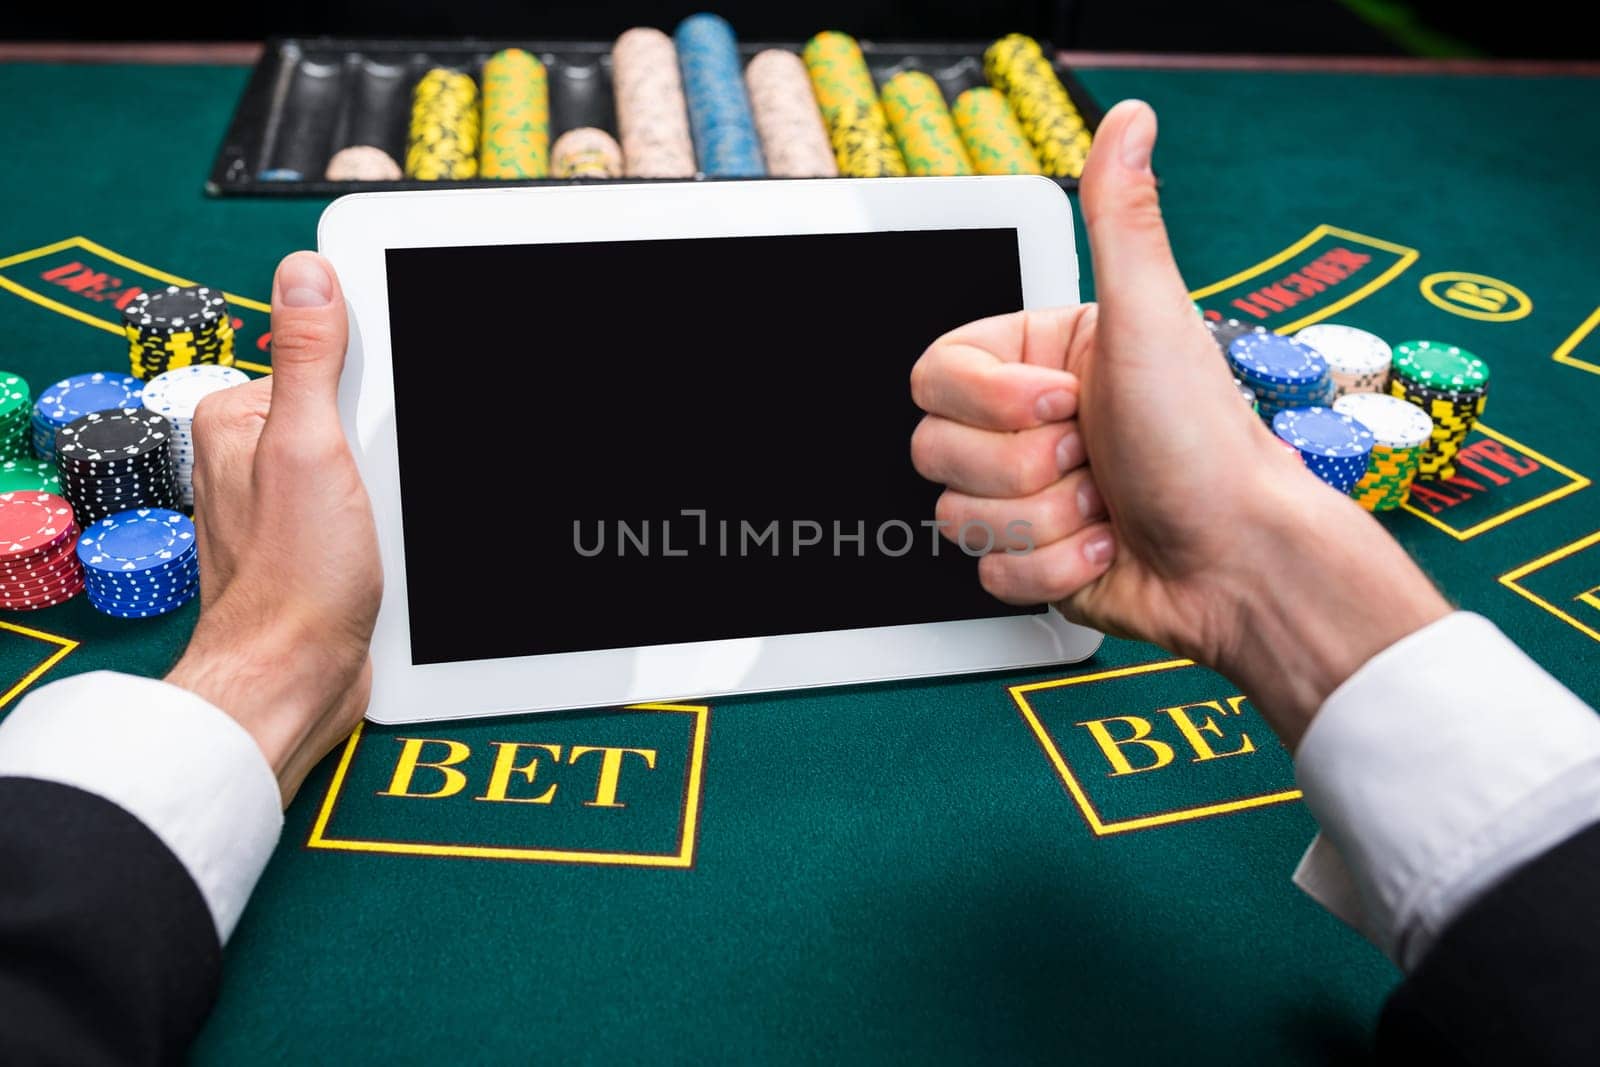 casino, online gambling, technology and people concept - close up of poker player with playing cards, tablet and chips at green casino table. first-person view.